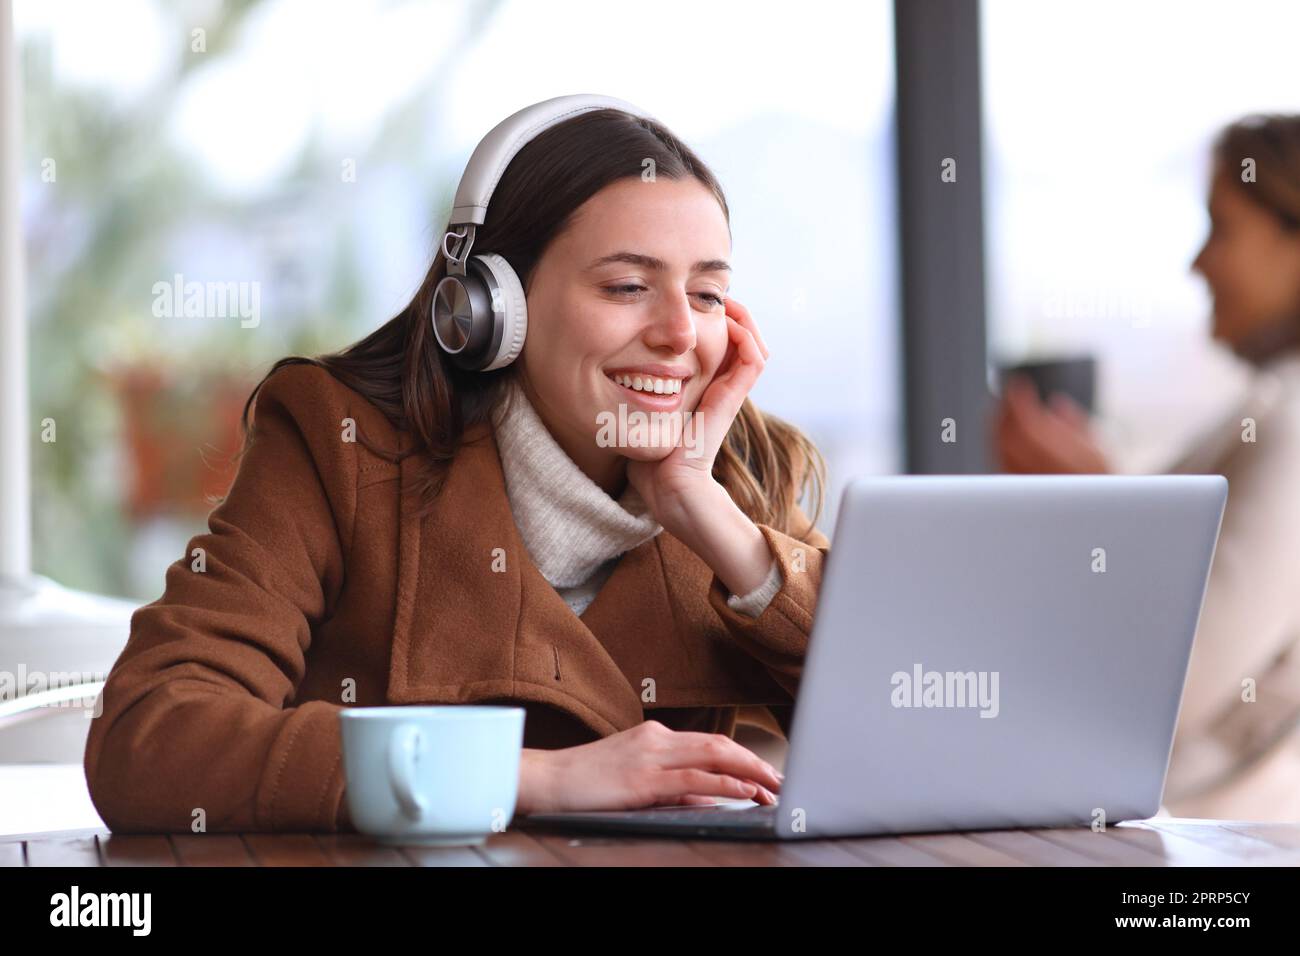 Woman in a bar watching media on laptop Stock Photo